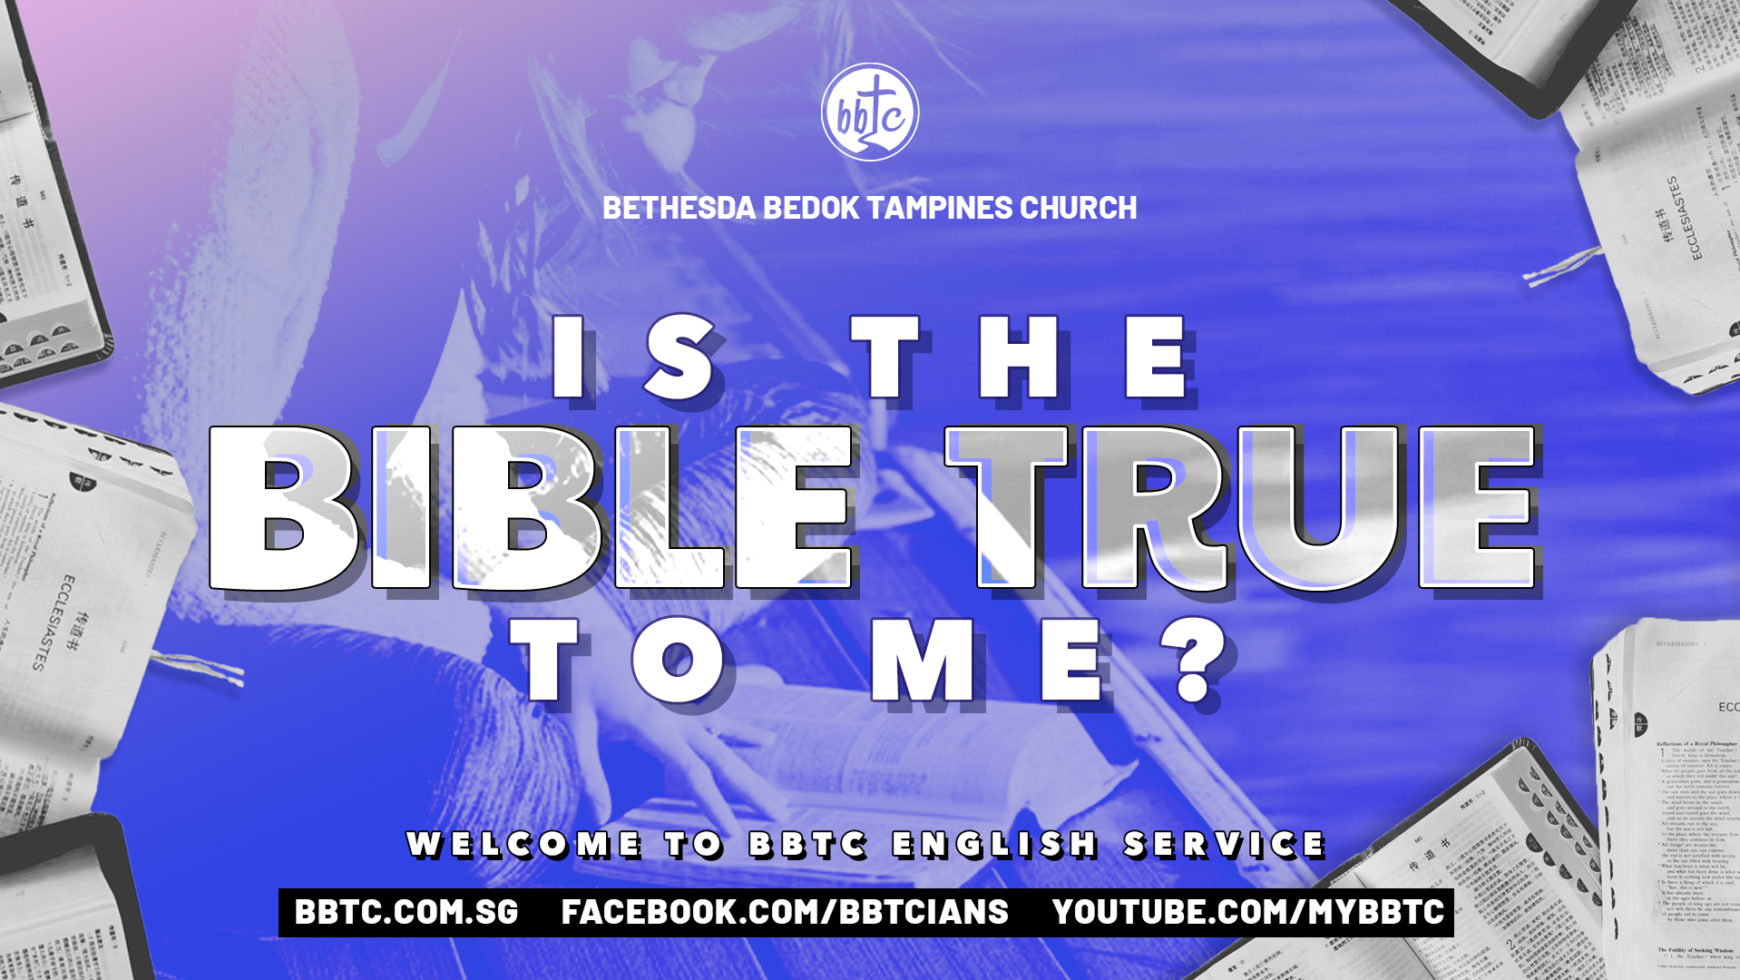 IS THE BIBLE TRUE TO ME?